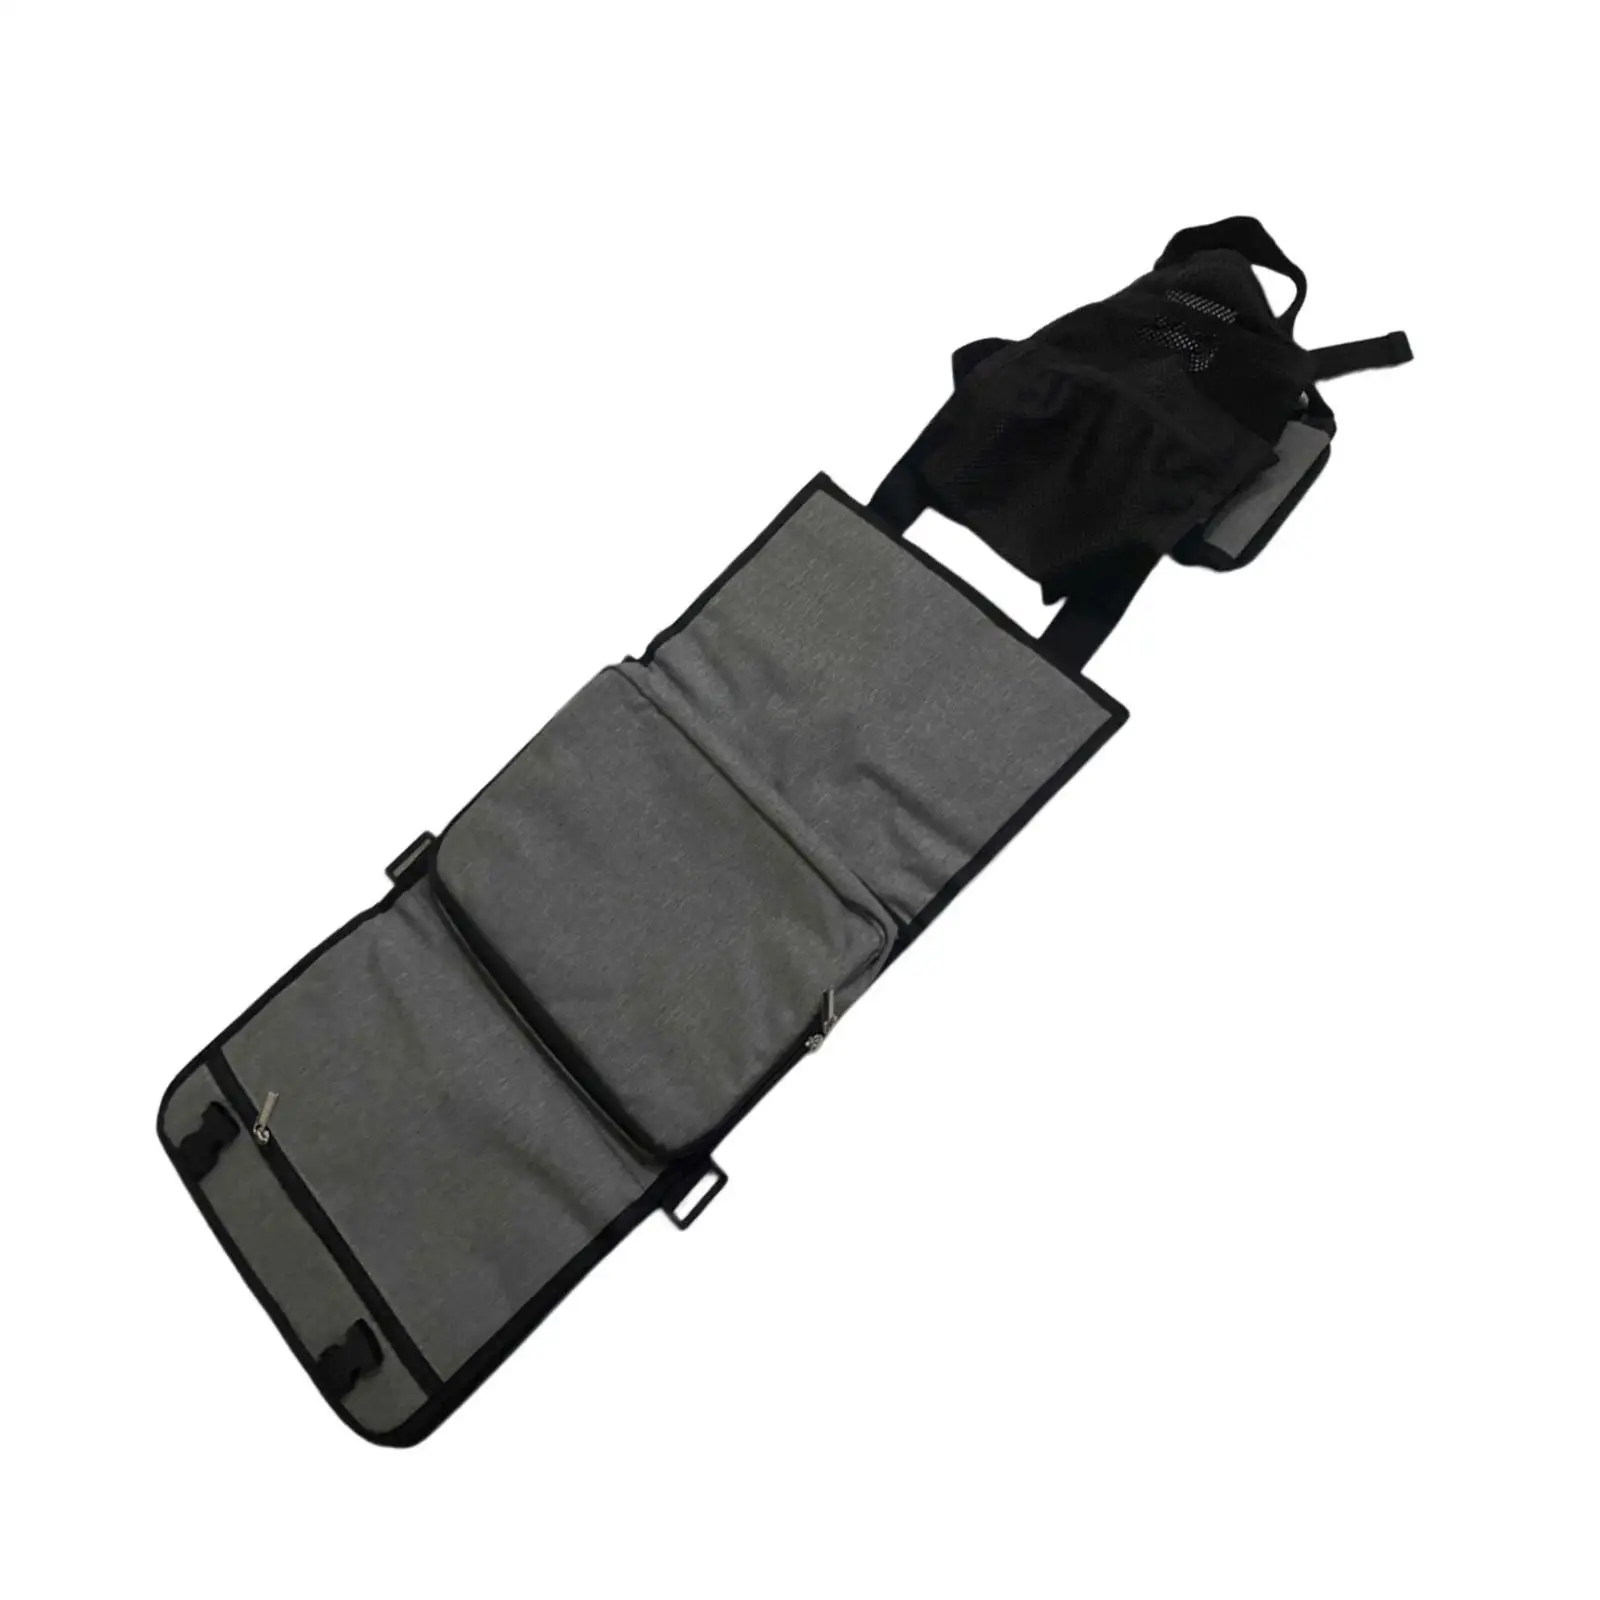 PC Tower Carrying Strap with Handle Multiple Pockets for Keyboard Mouse and Extra Accessories